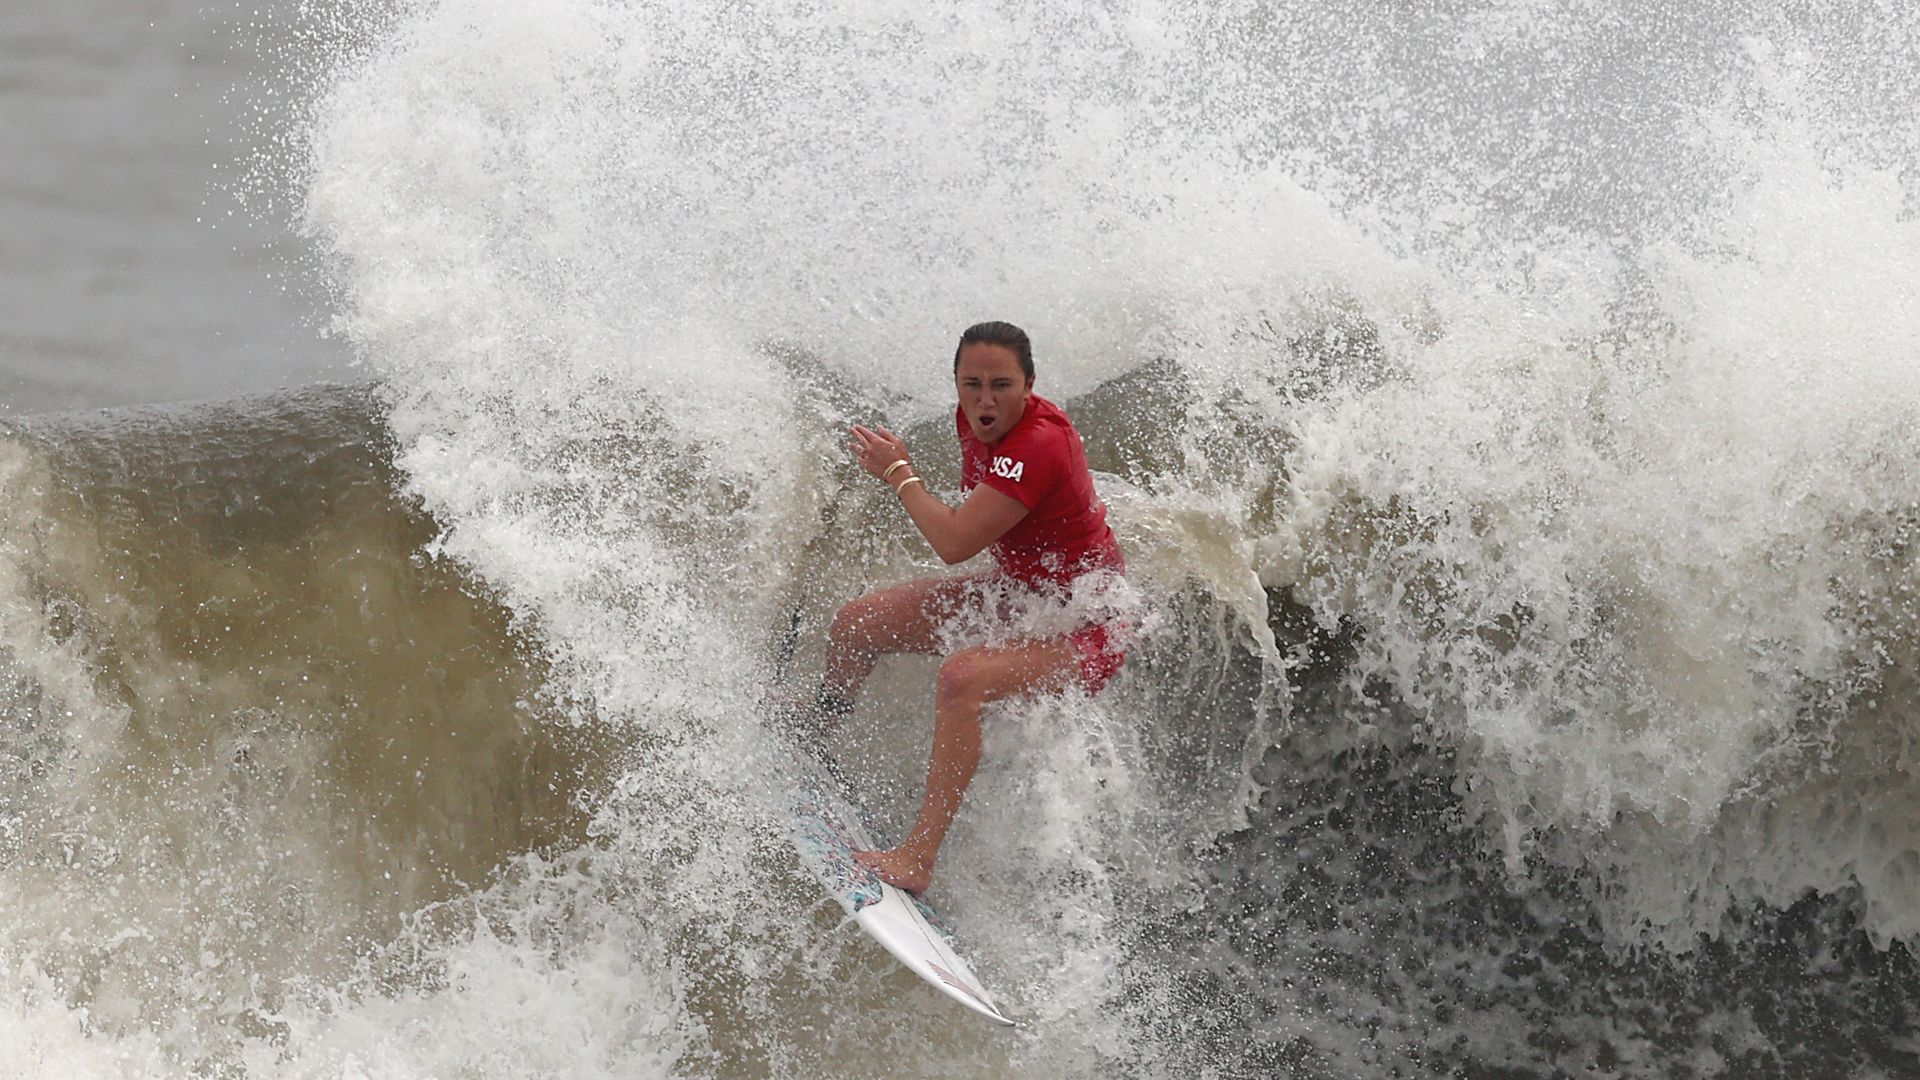  Carissa Moore of Team United States surfs during the women's Quarter Final on day four of the Tokyo 2020 Olympic Games at Tsurigasaki Surfing Beach on July 27, 2021 in Ichinomiya, Chiba, Japan.